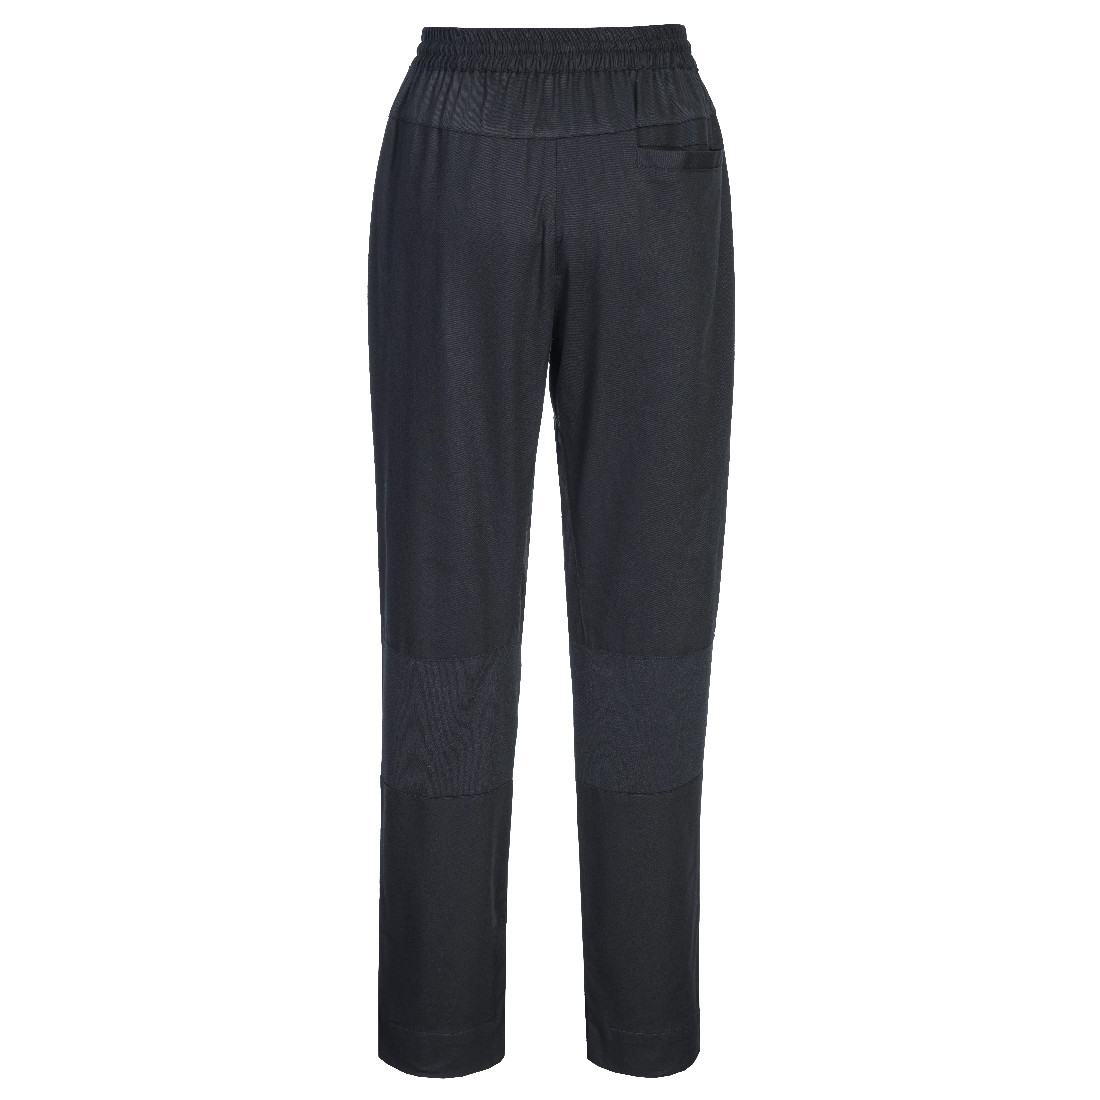 Cotton Mesh Air Chef Trousers - Safetywear